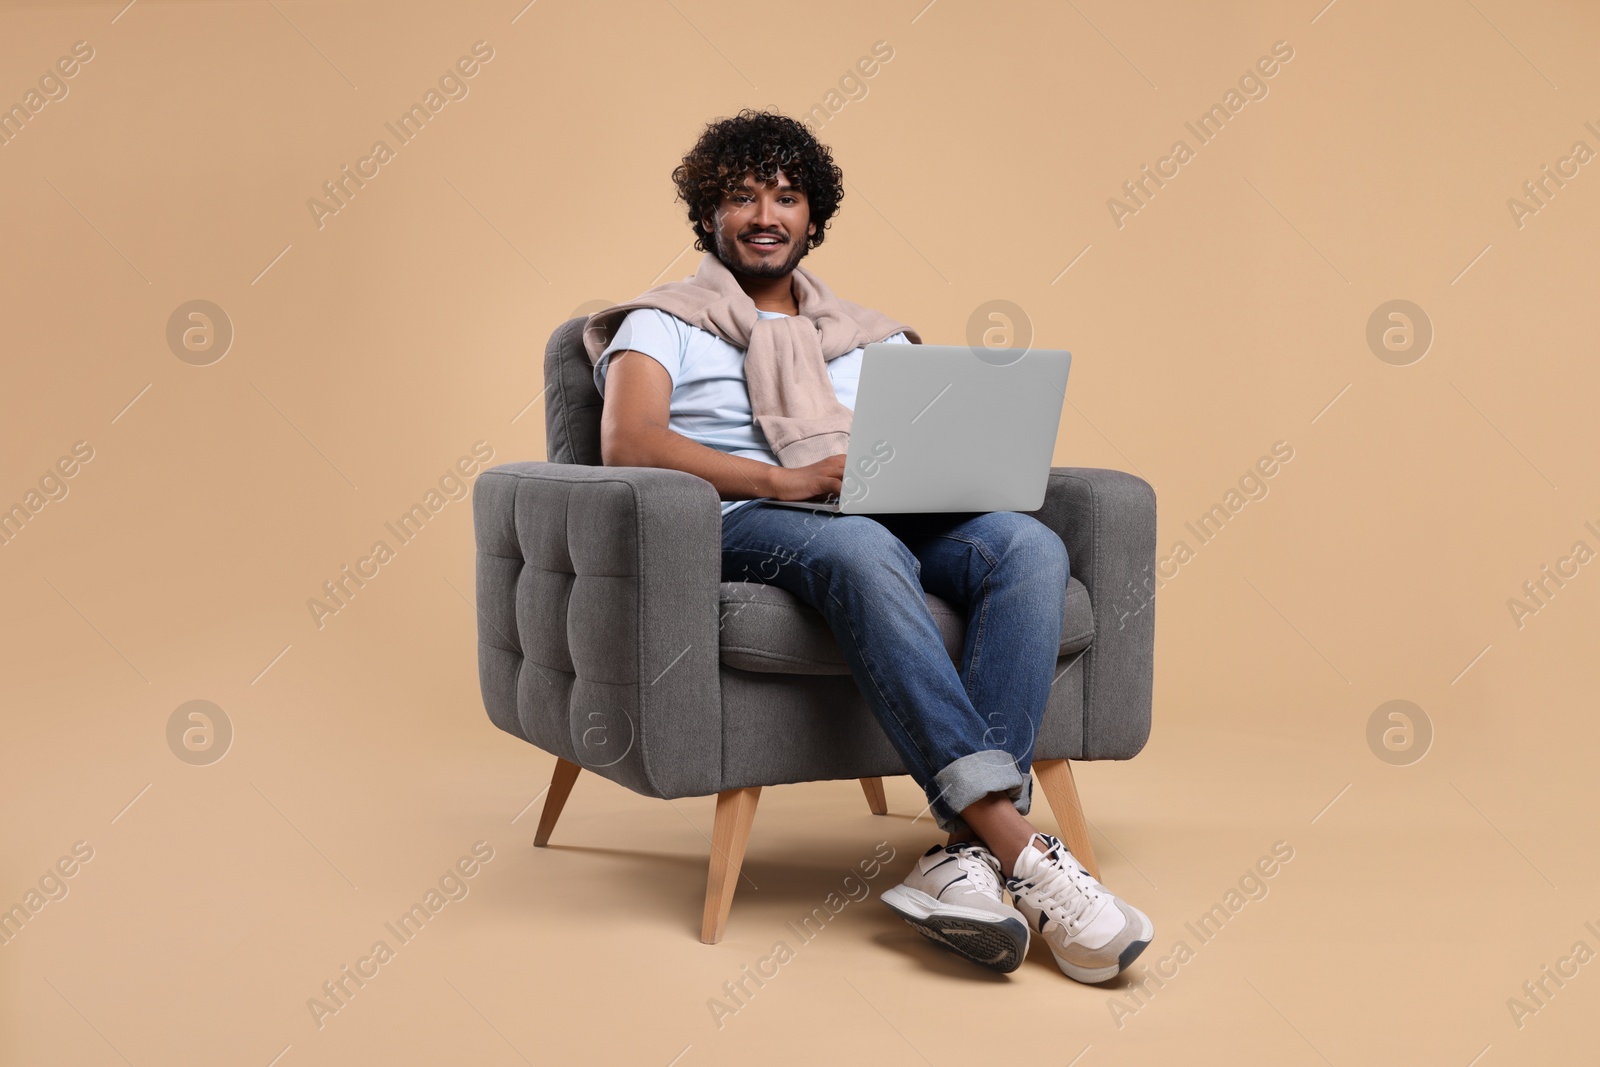 Photo of Smiling man with laptop sitting in armchair on beige background